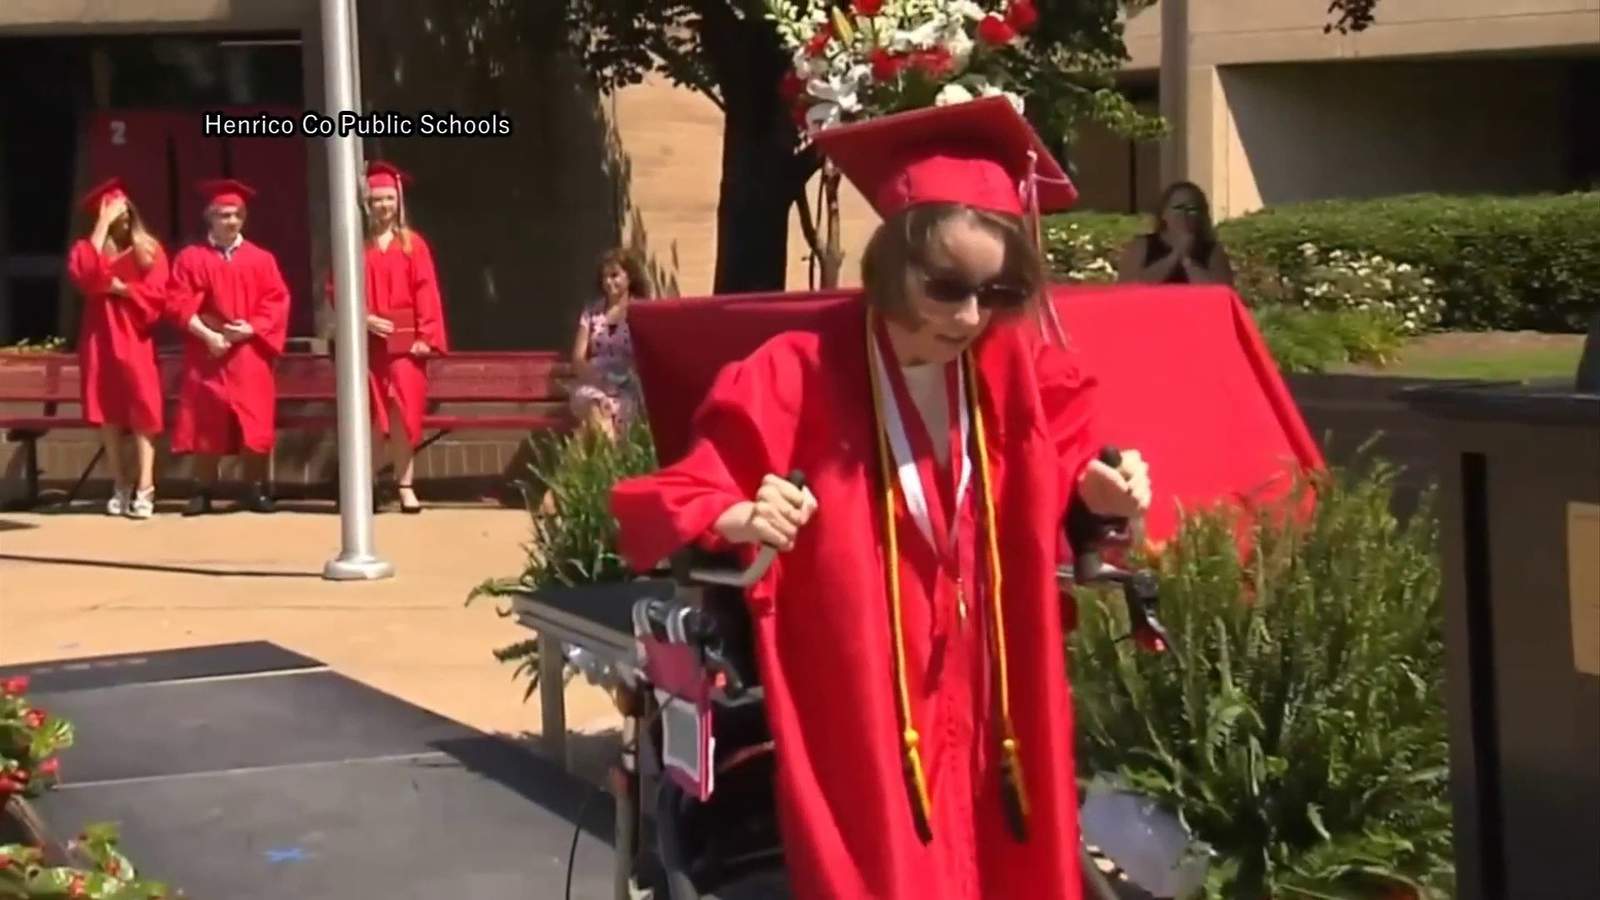 After numerous surgeries, Virginia teen reaches goal of walking across graduation stage